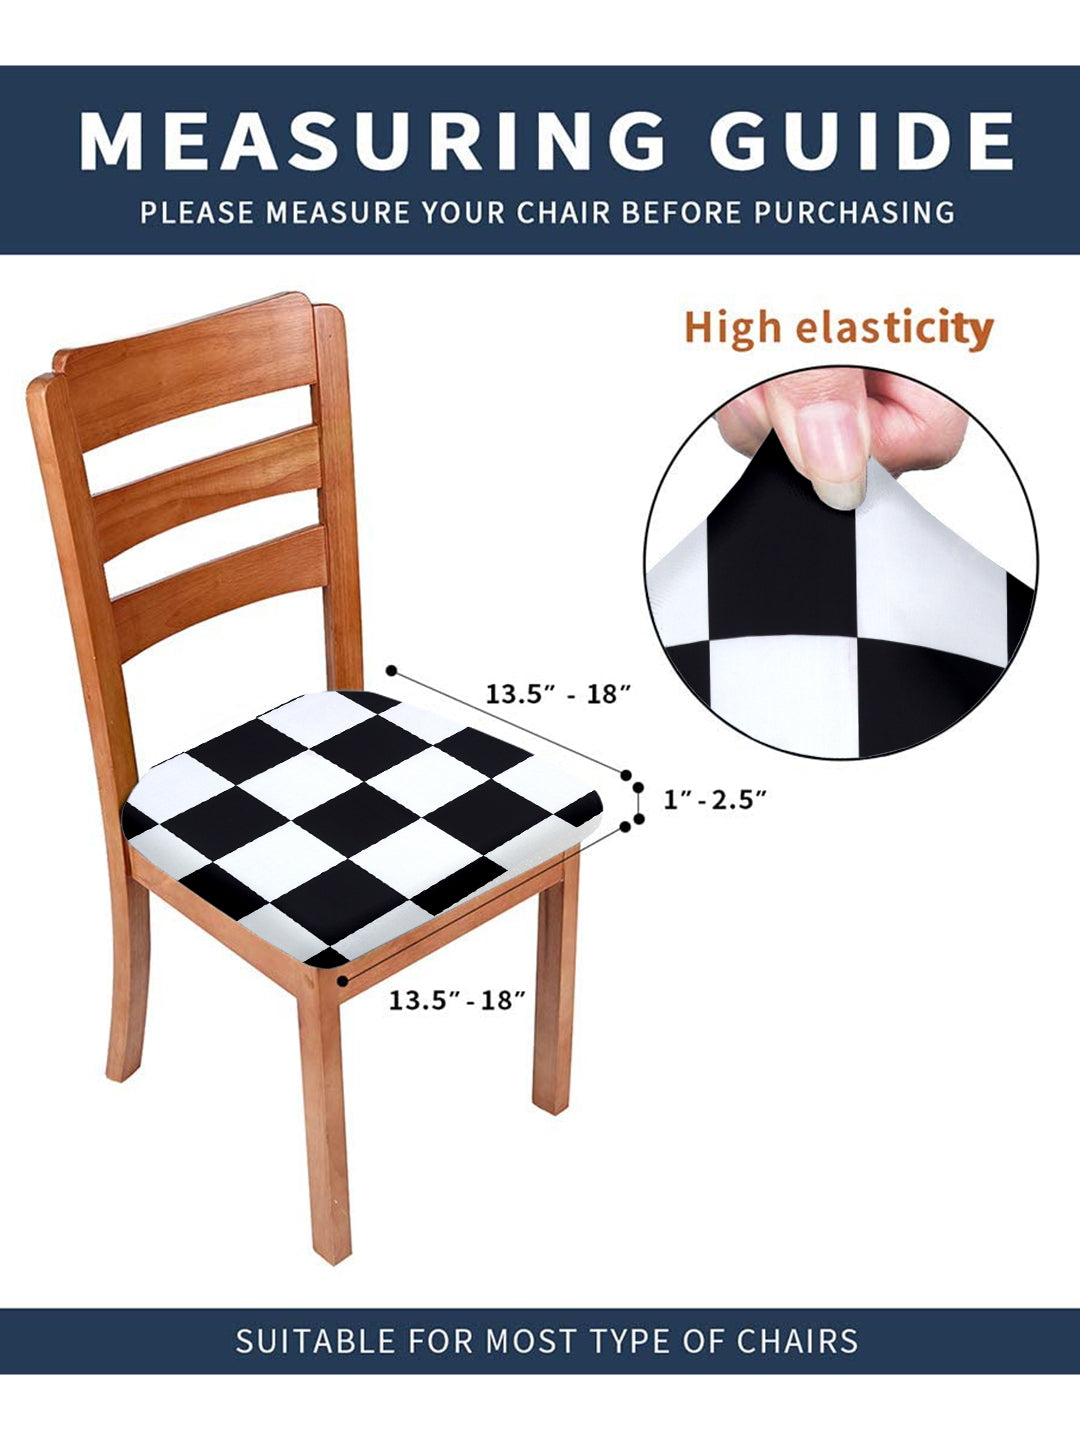 Stretchable Checks Printed Non Slip Chair Pad Cover Pack of 1- Black & White